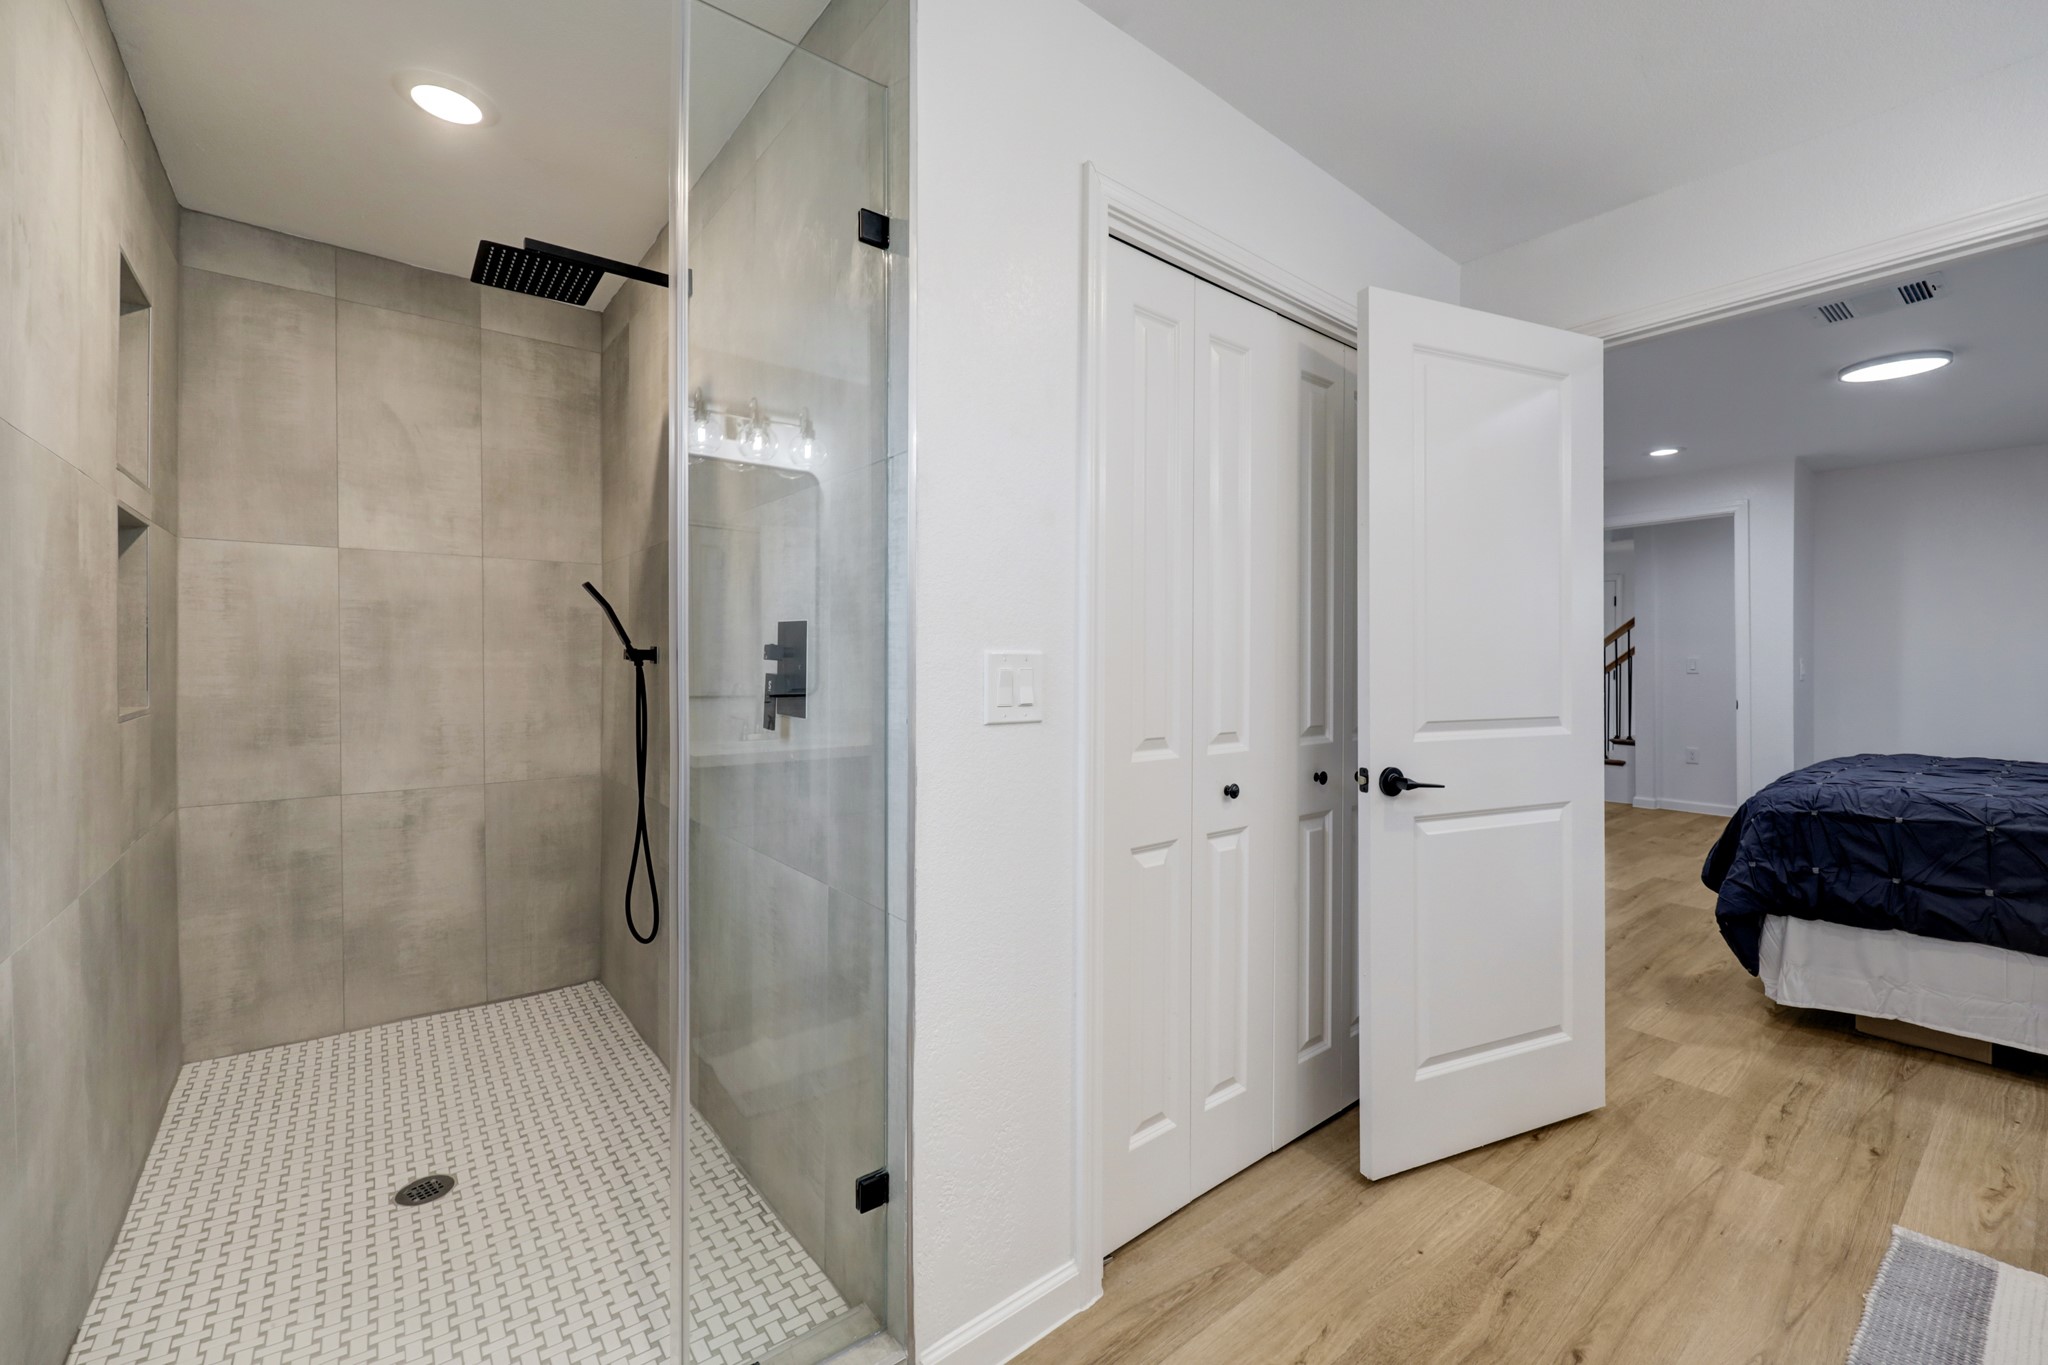 Step inside the HUGE primary shower that has two niches and a hand held wand.